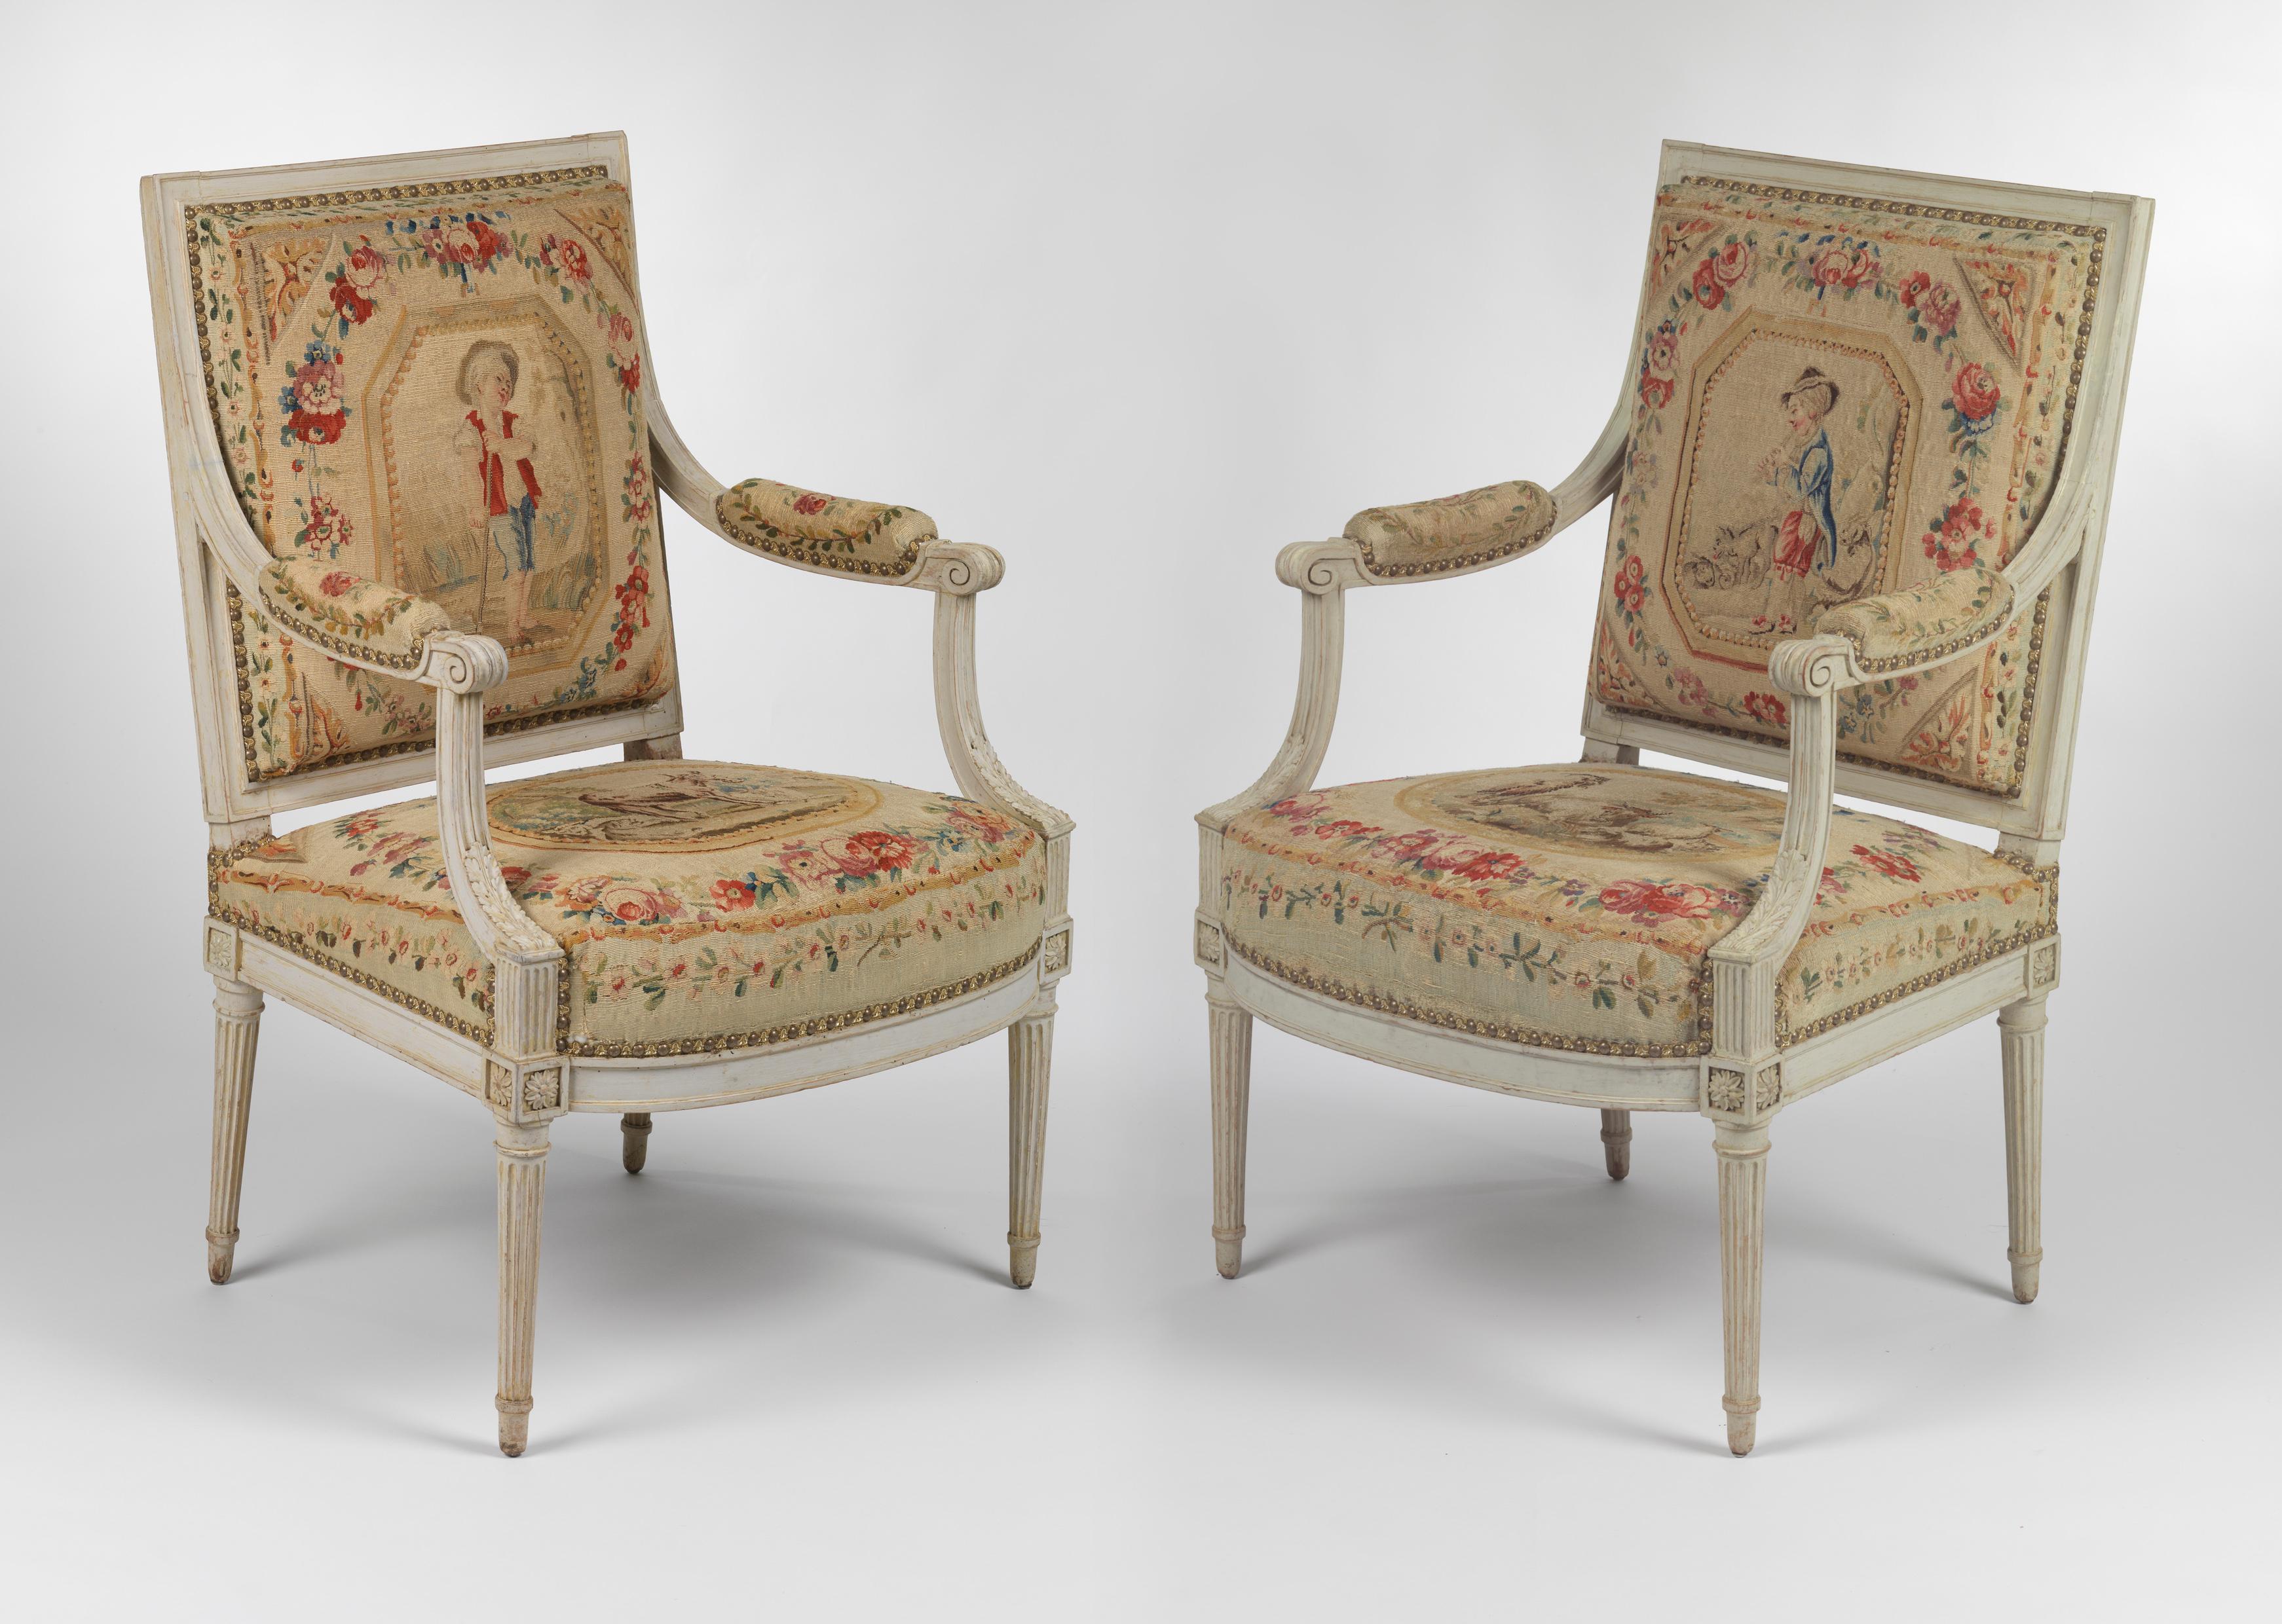 Comprising a canapé and six fauteuils, each covered in its original Aubusson tapestry, depicting the Fables de La Fontaine and other pastoral scenes, the canapé stamped twice H. JACOB, all inscribed in red with museum accession number 42.27-42.33